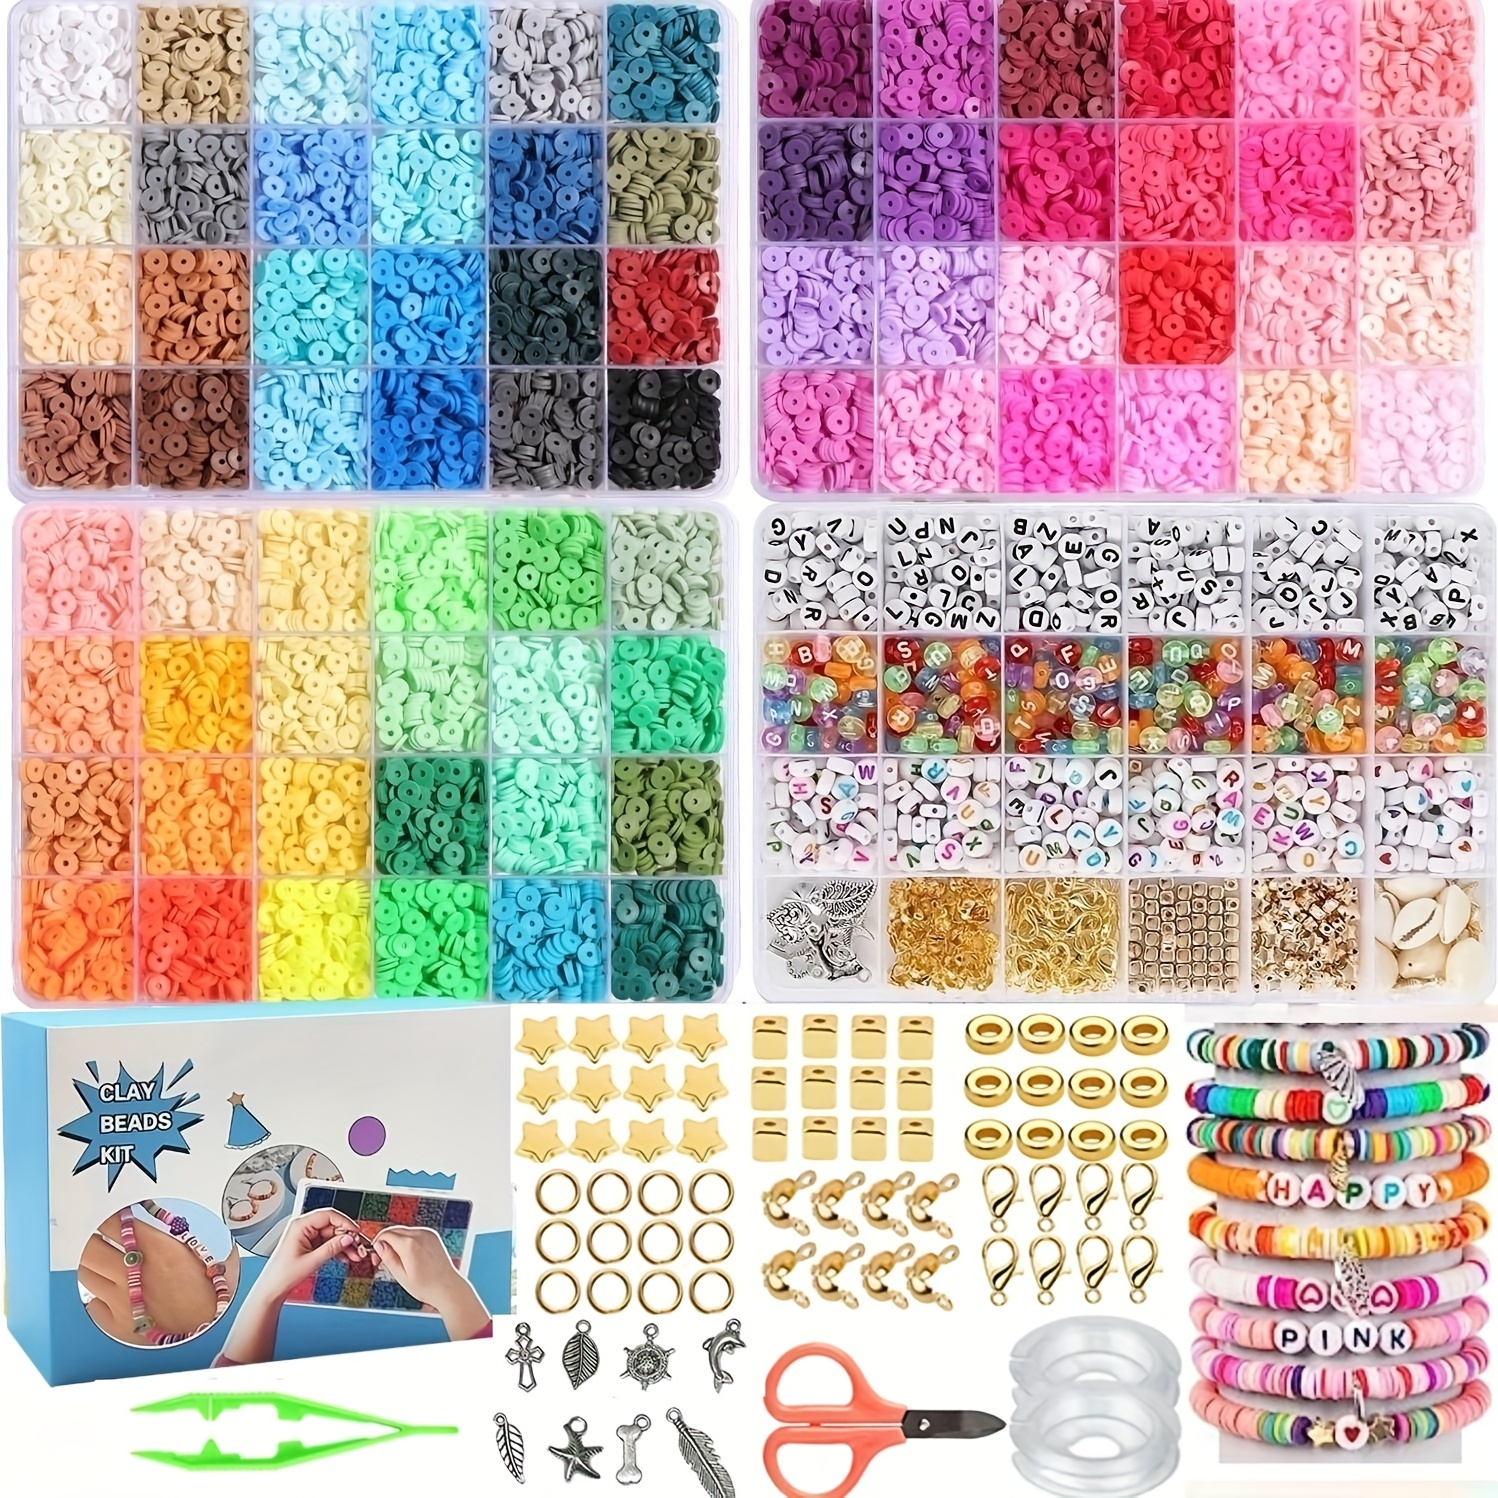  2022 New 4500 PCS Clay Beads for Bracelets Making, Polymer Clay  Beads Kit 19 Colors Flat Beads for Jewelry Making DIY Round Disc Letter  Beads for Necklace Making Set with Smiley